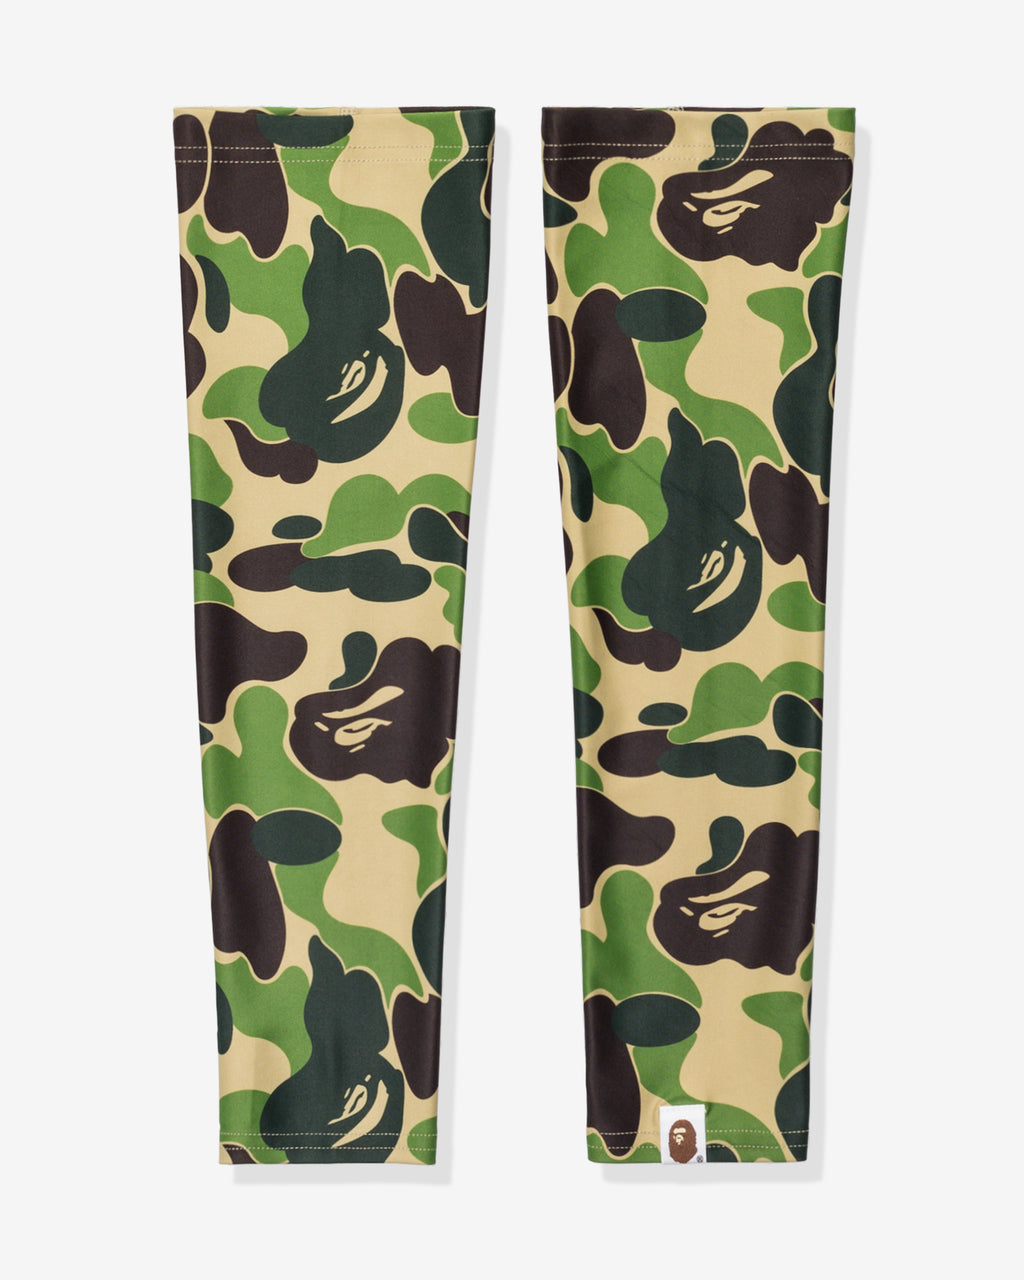 BAPE X OUTDOOR PRODUCTS 1ST CAMO DUFFEL - GREEN - - / OS